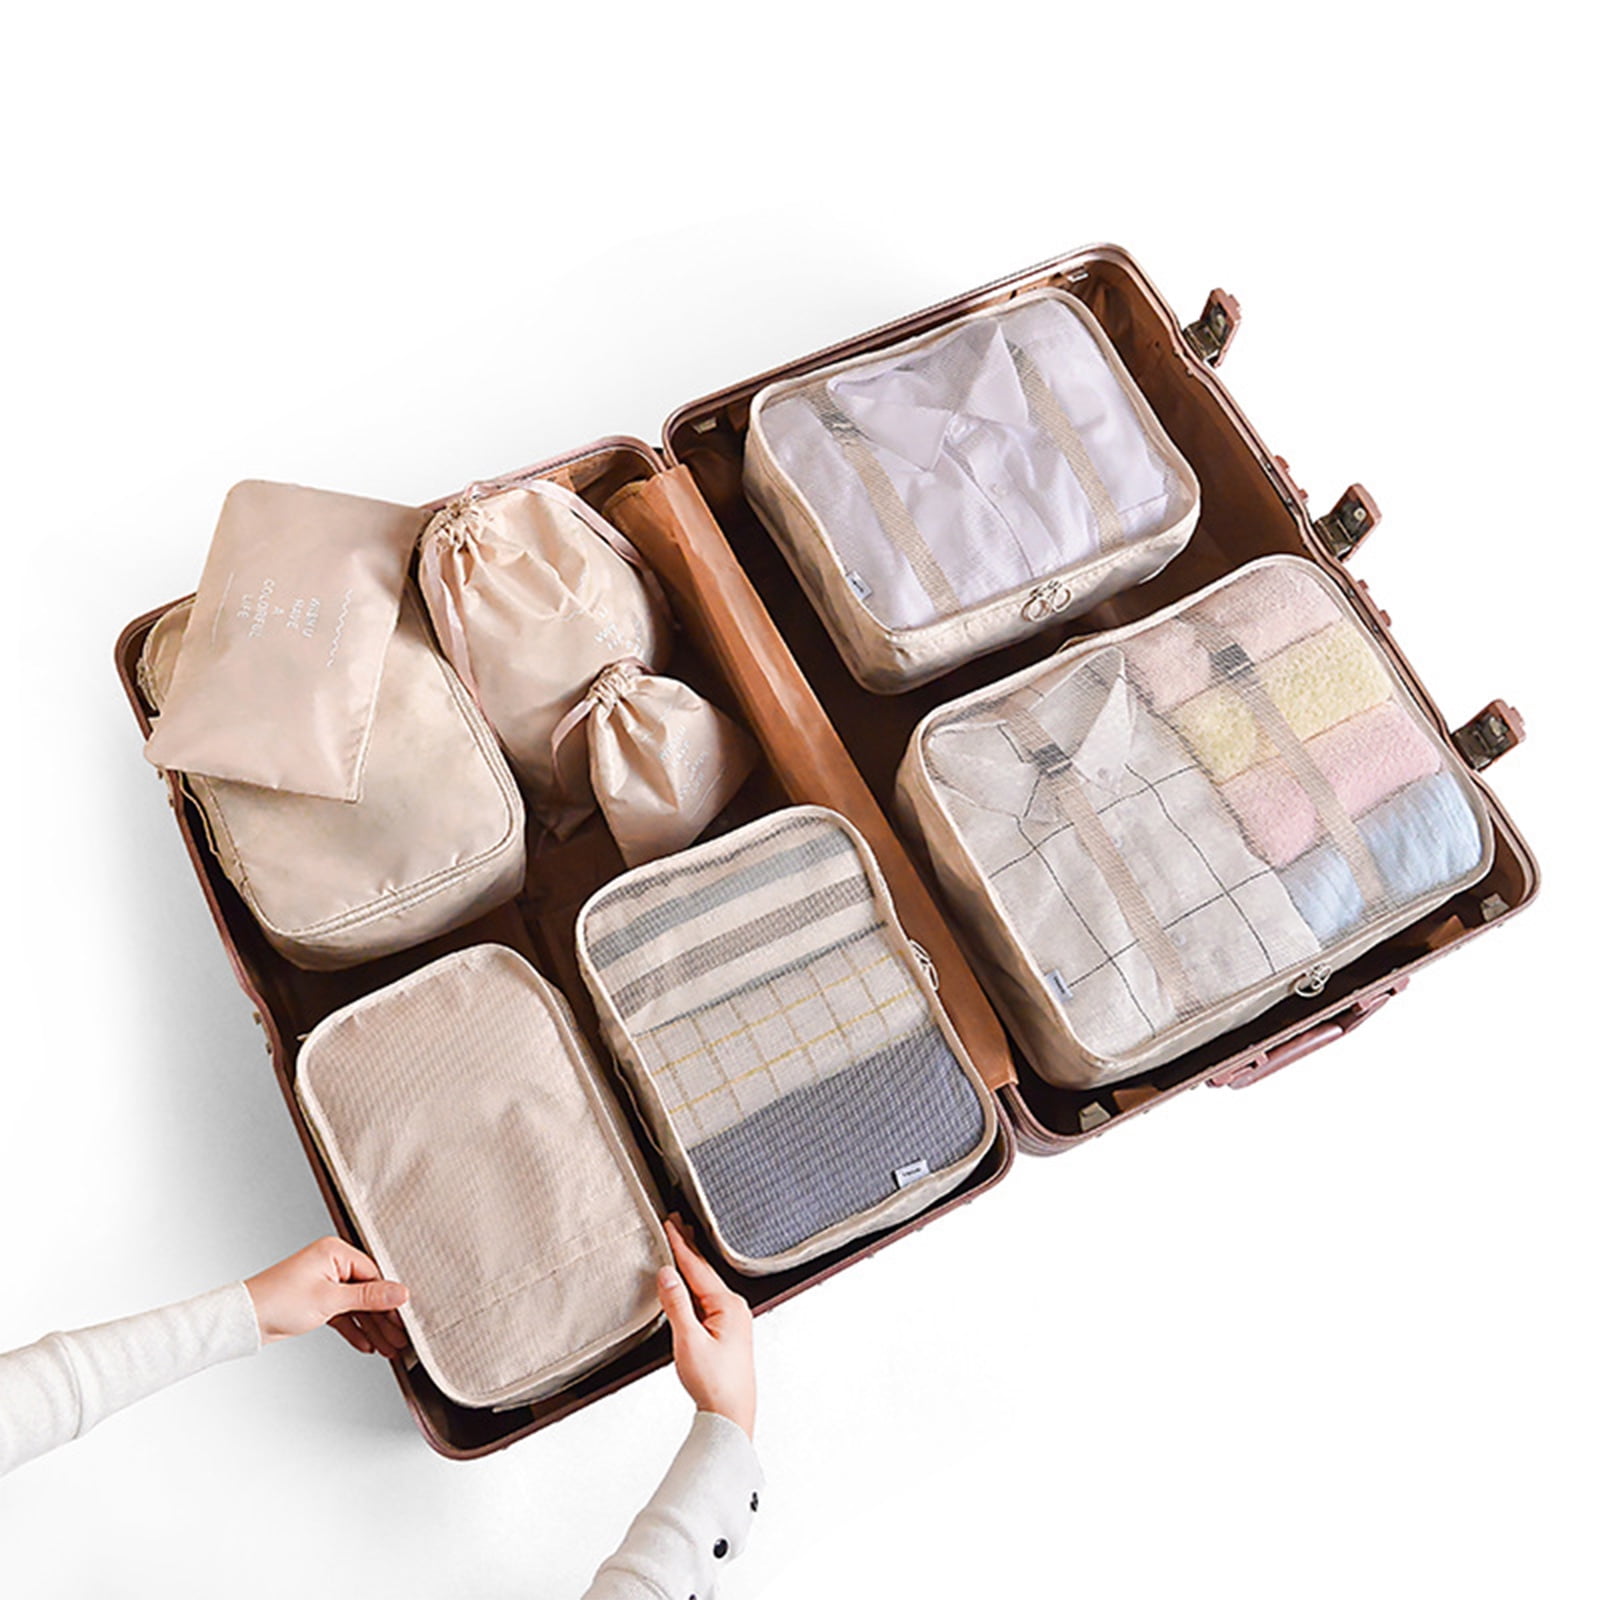 Compression Packing Cubes for Suitcase,CLUCI 4 Set Travel Essentials Organizer Bags for Luggage Travel Accessories, Beige with Brown